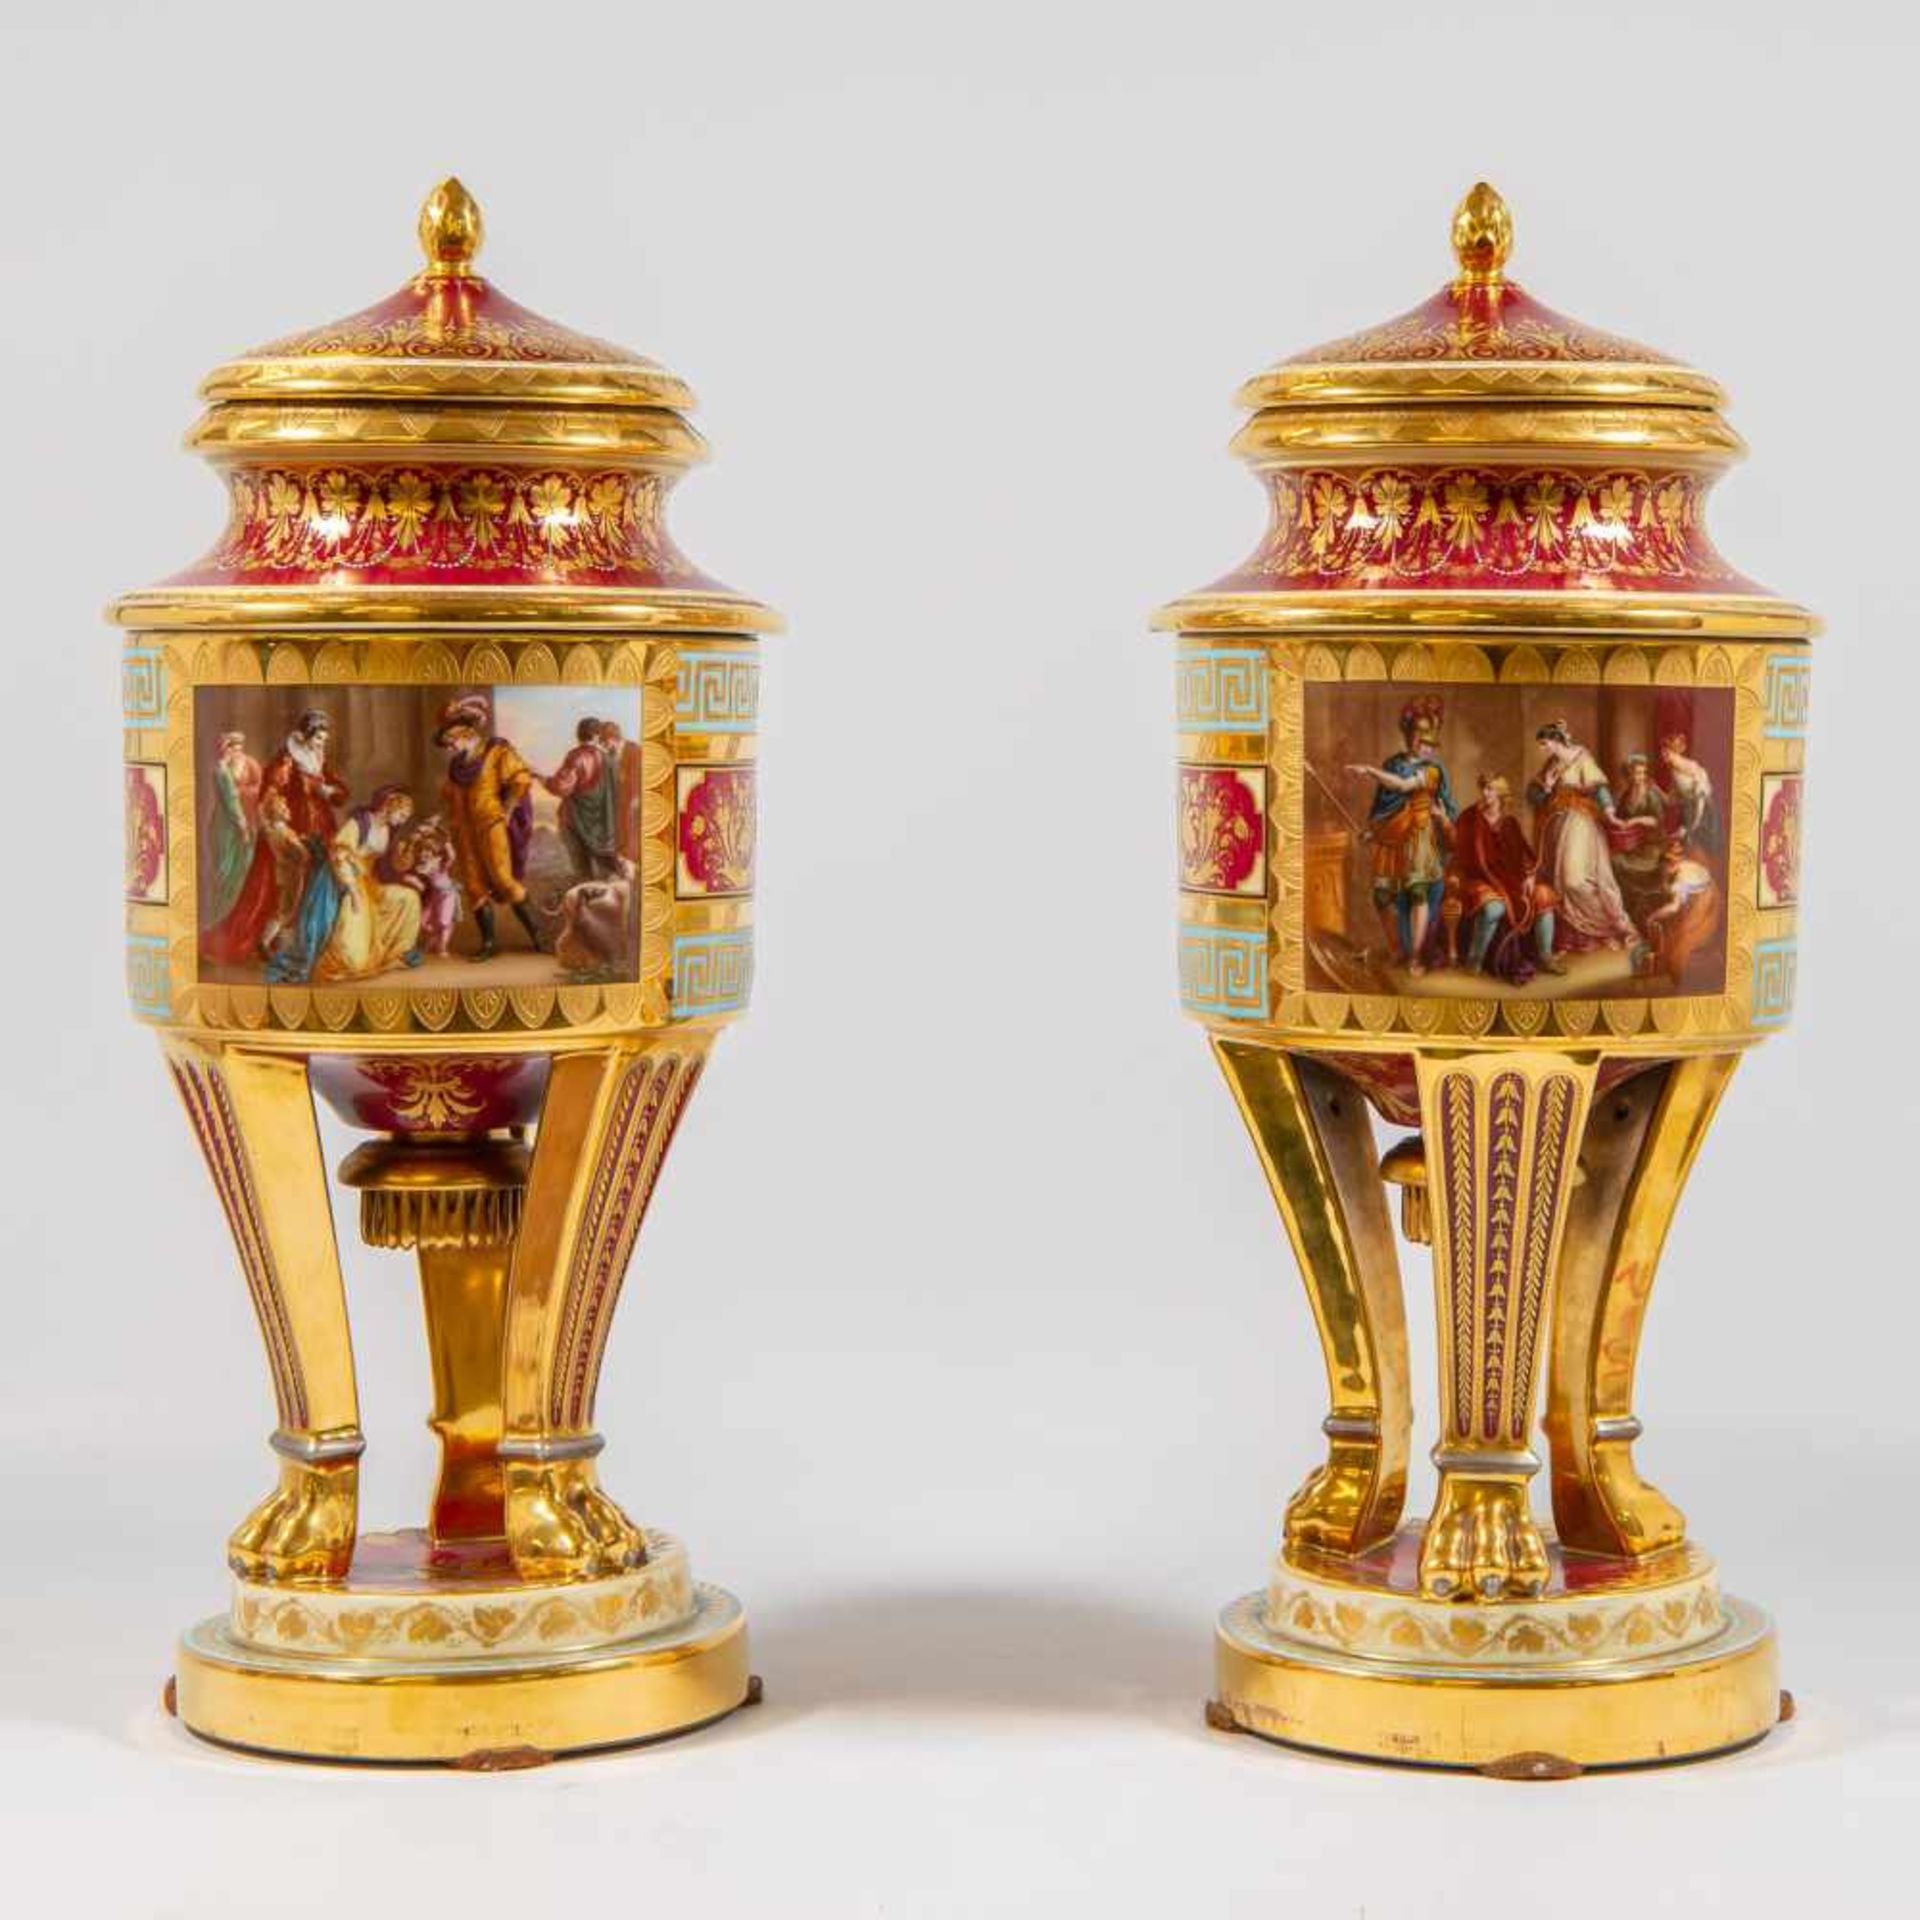 Pair of exceptional Ice-pails Royal Vienna, handpainted with 4 large decor's. "Hektor Paris &